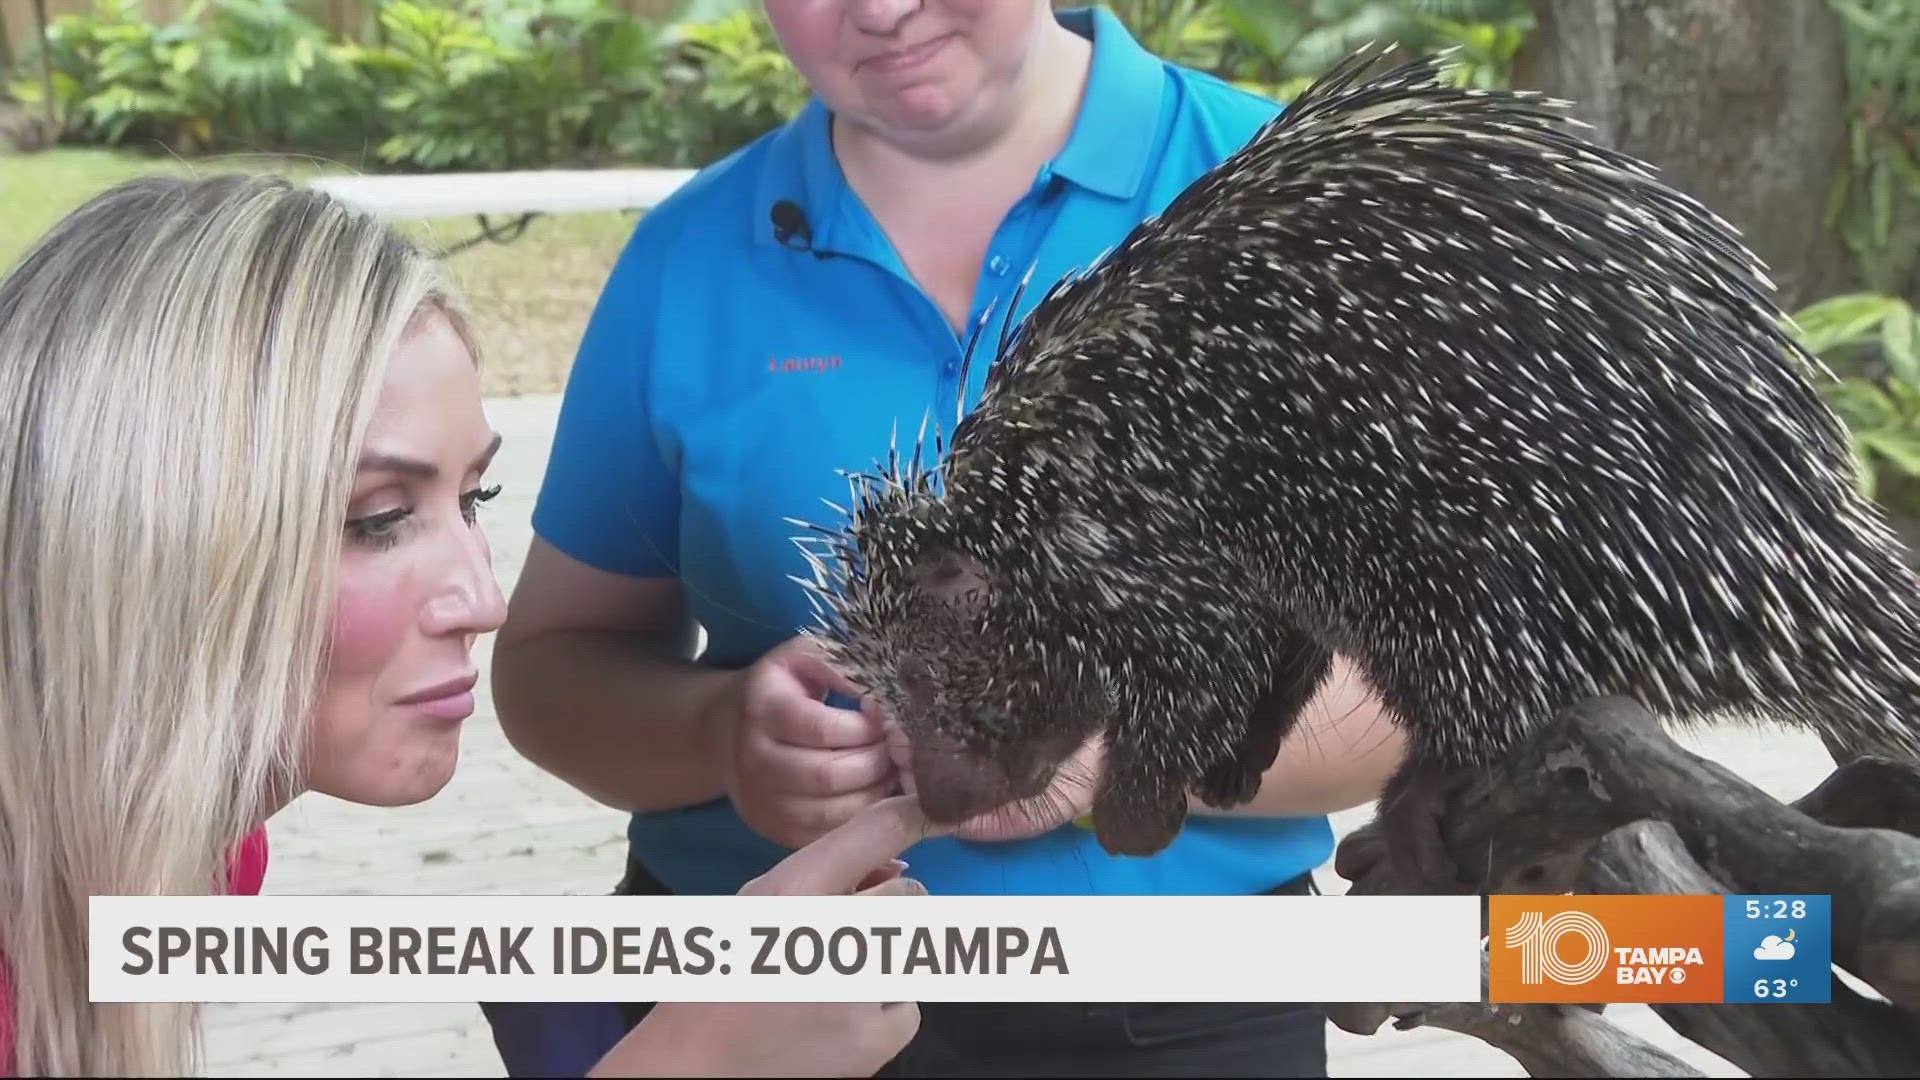 ZooTampa has a number of interactive animal experiences for the whole family to enjoy.